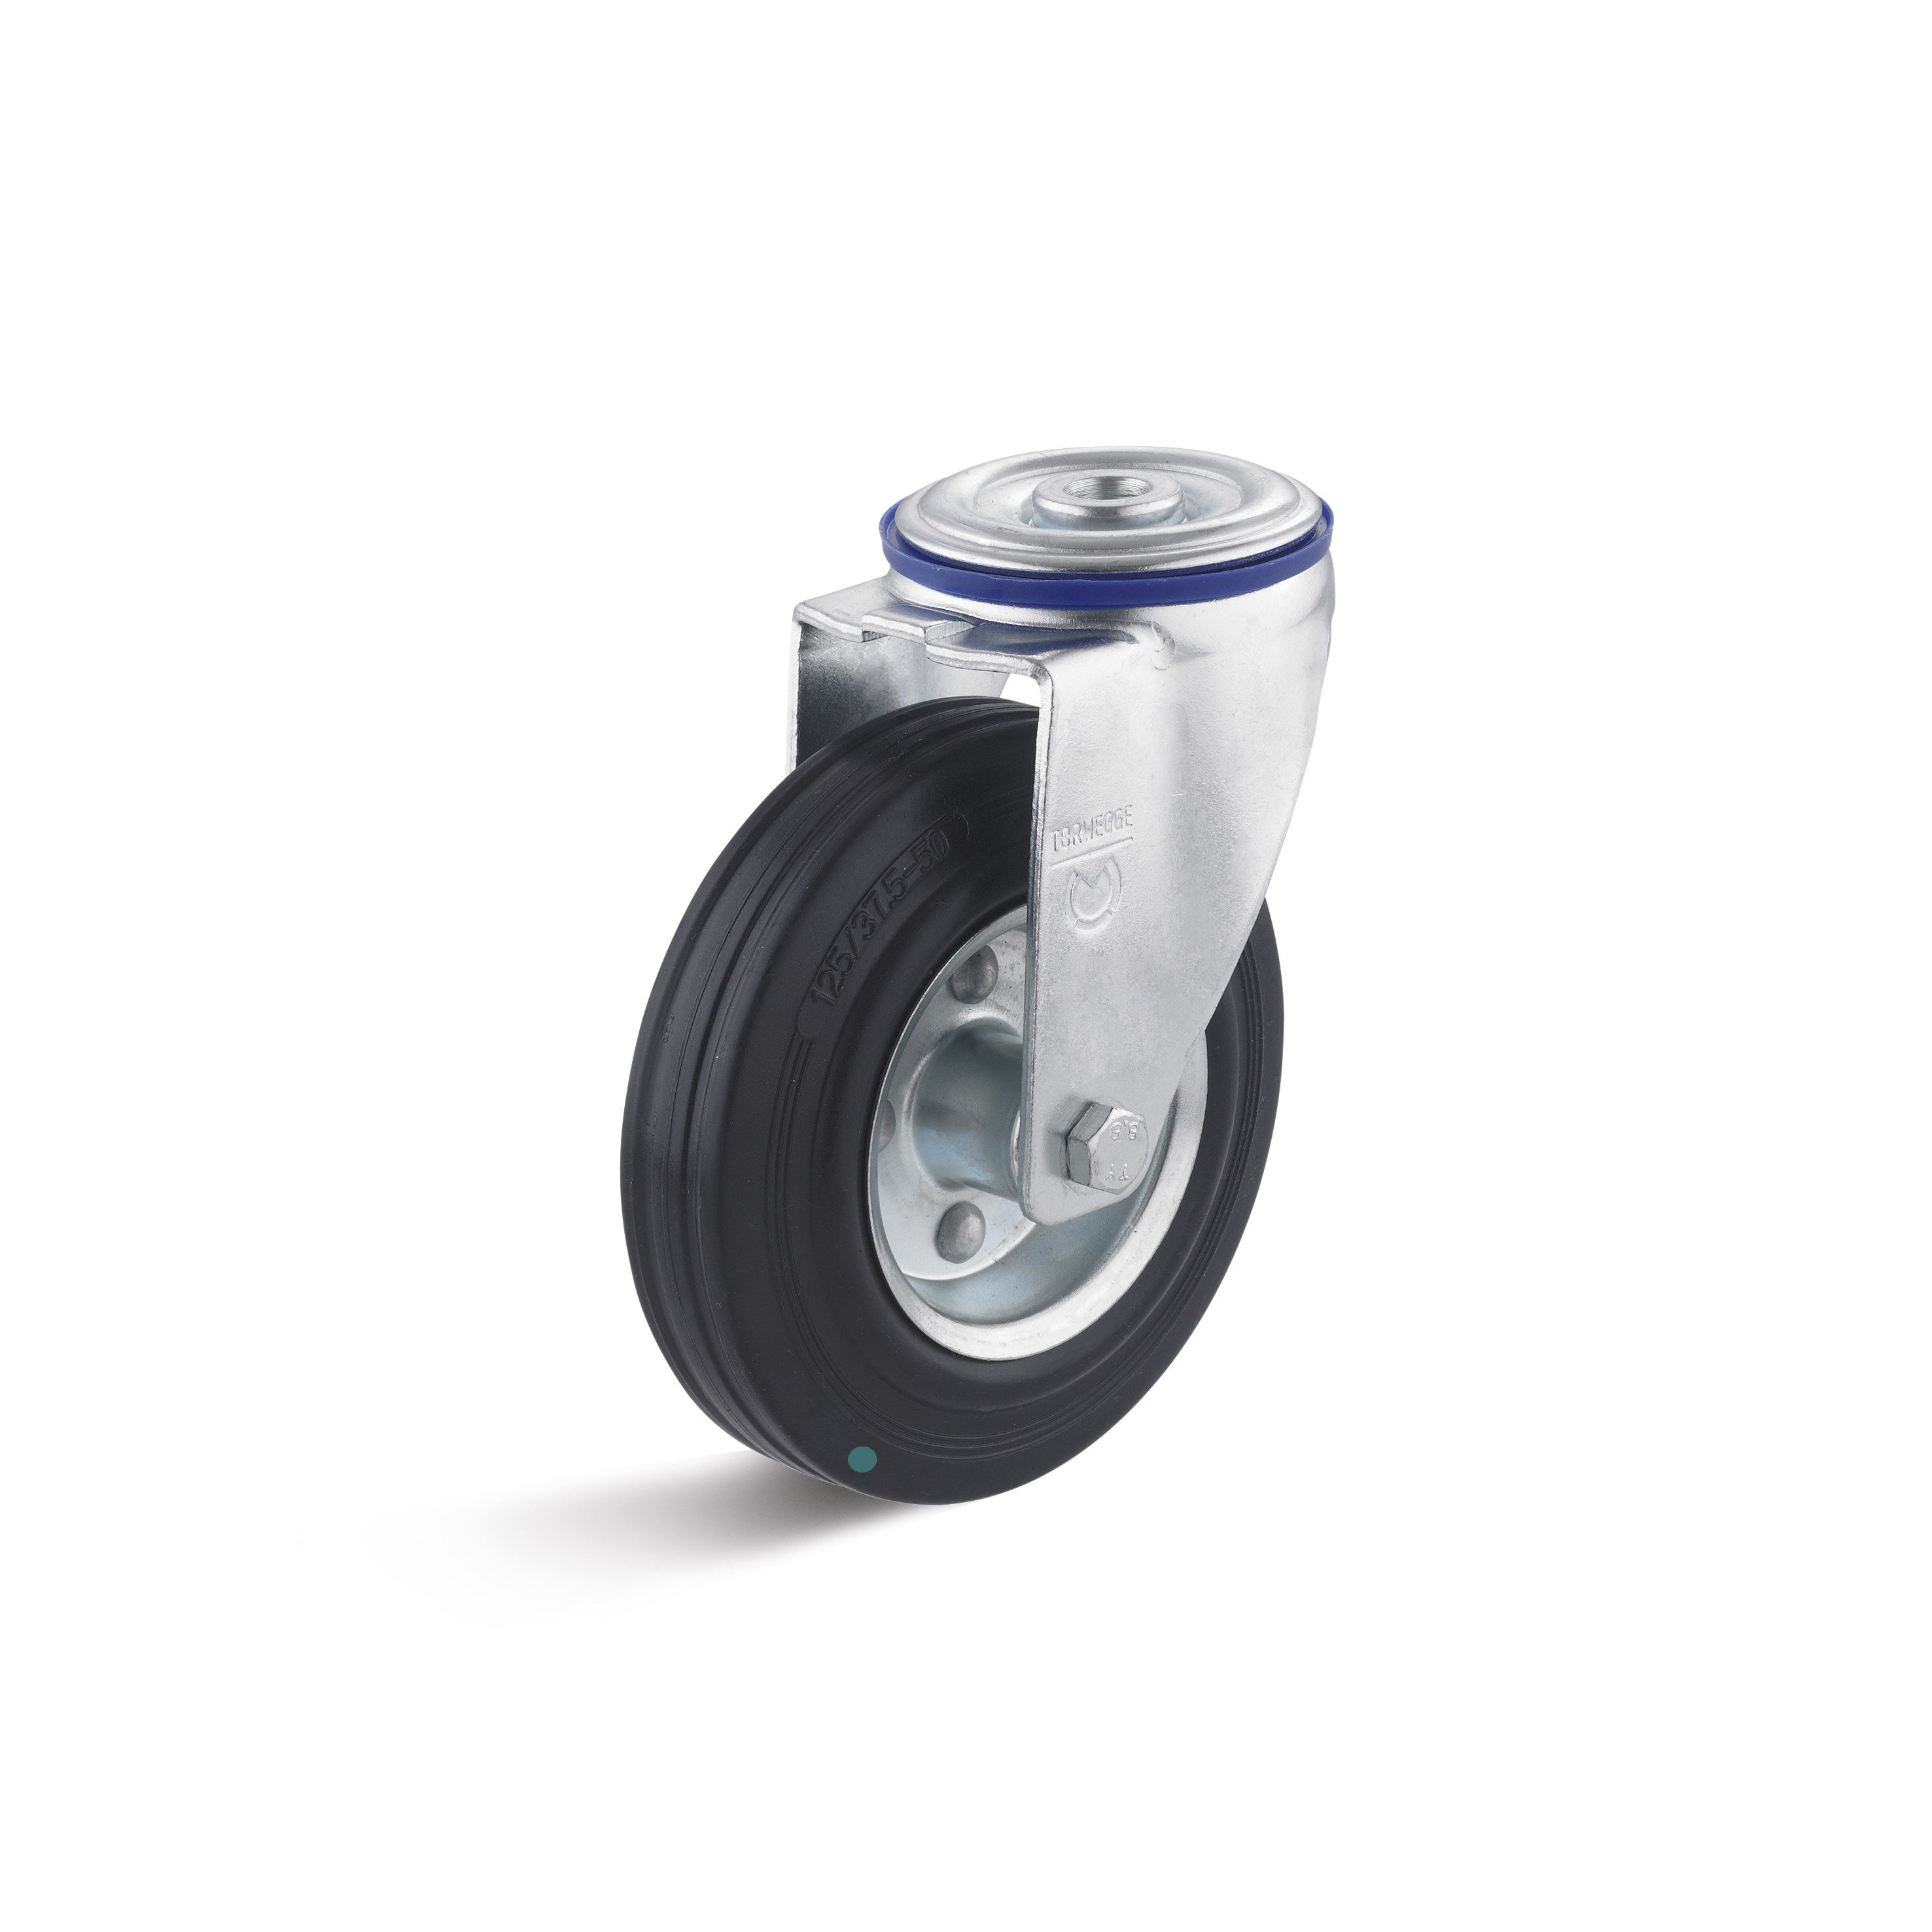 Swivel castor with back hole and solid rubber wheel